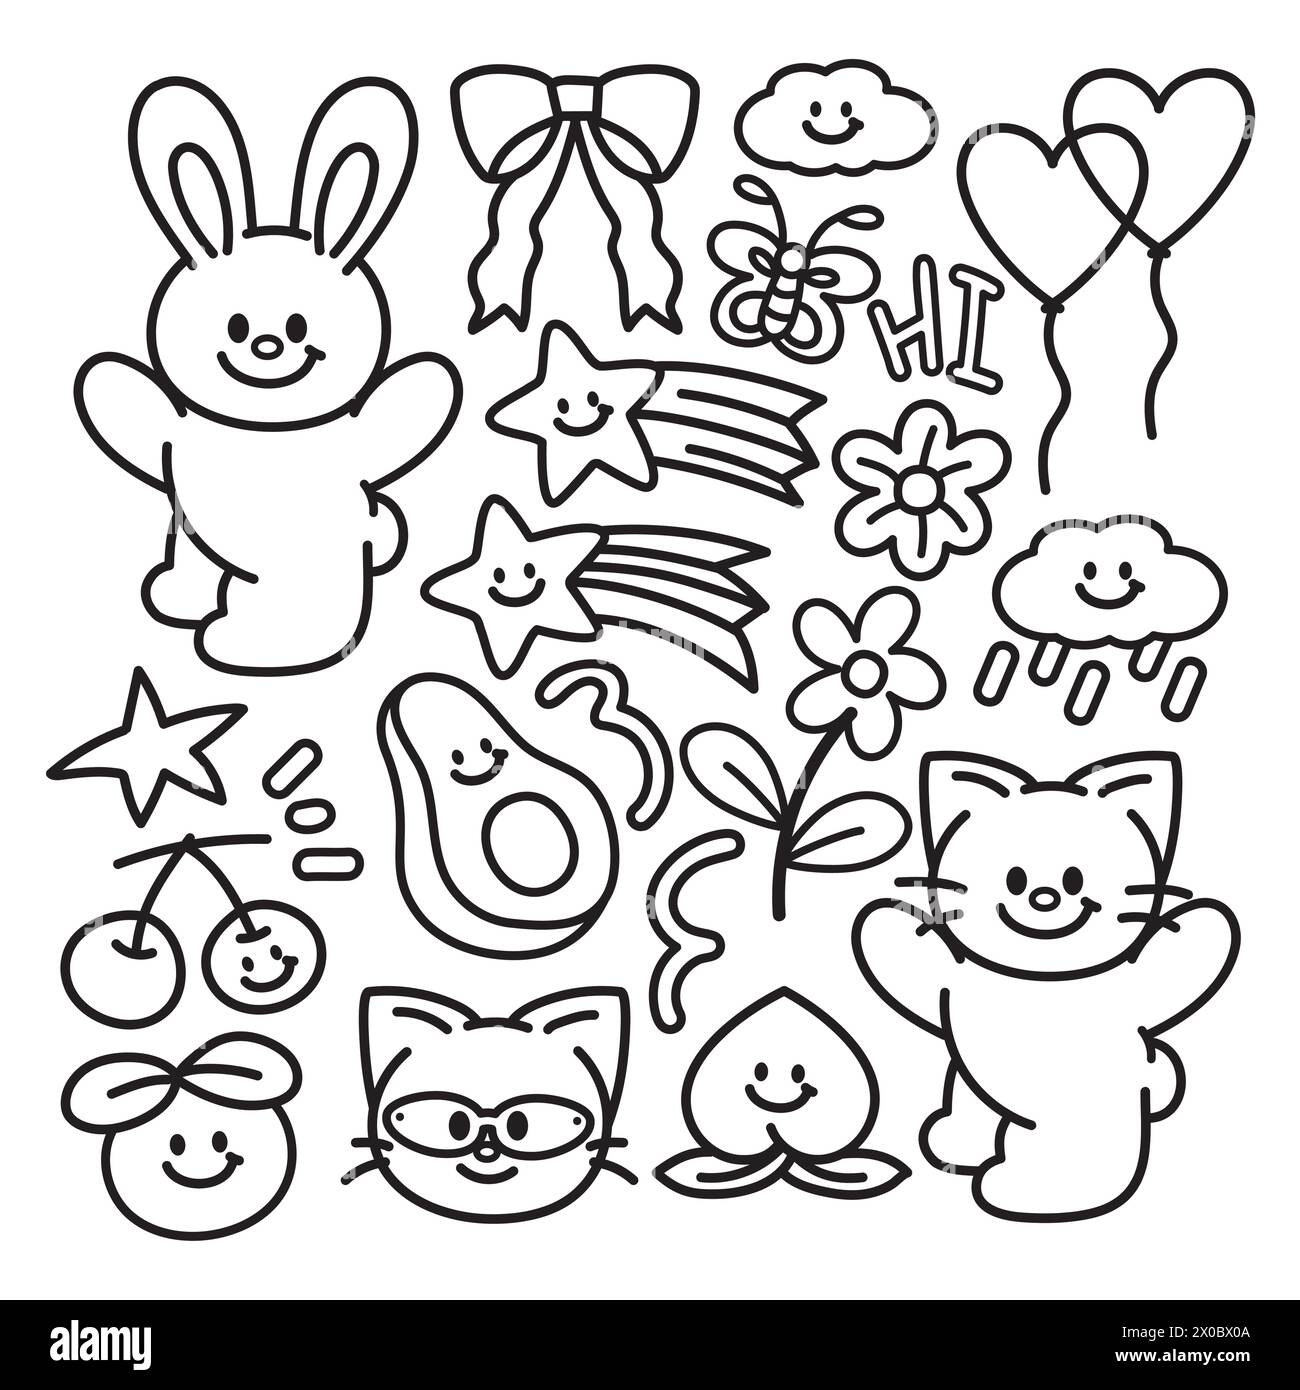 Black outlines of pink bunny, butterfly, cat, cherry, avocado, orange, peach, pink ribbon, cloud, rain, flowers, shooting star for kid colouring book Stock Vector